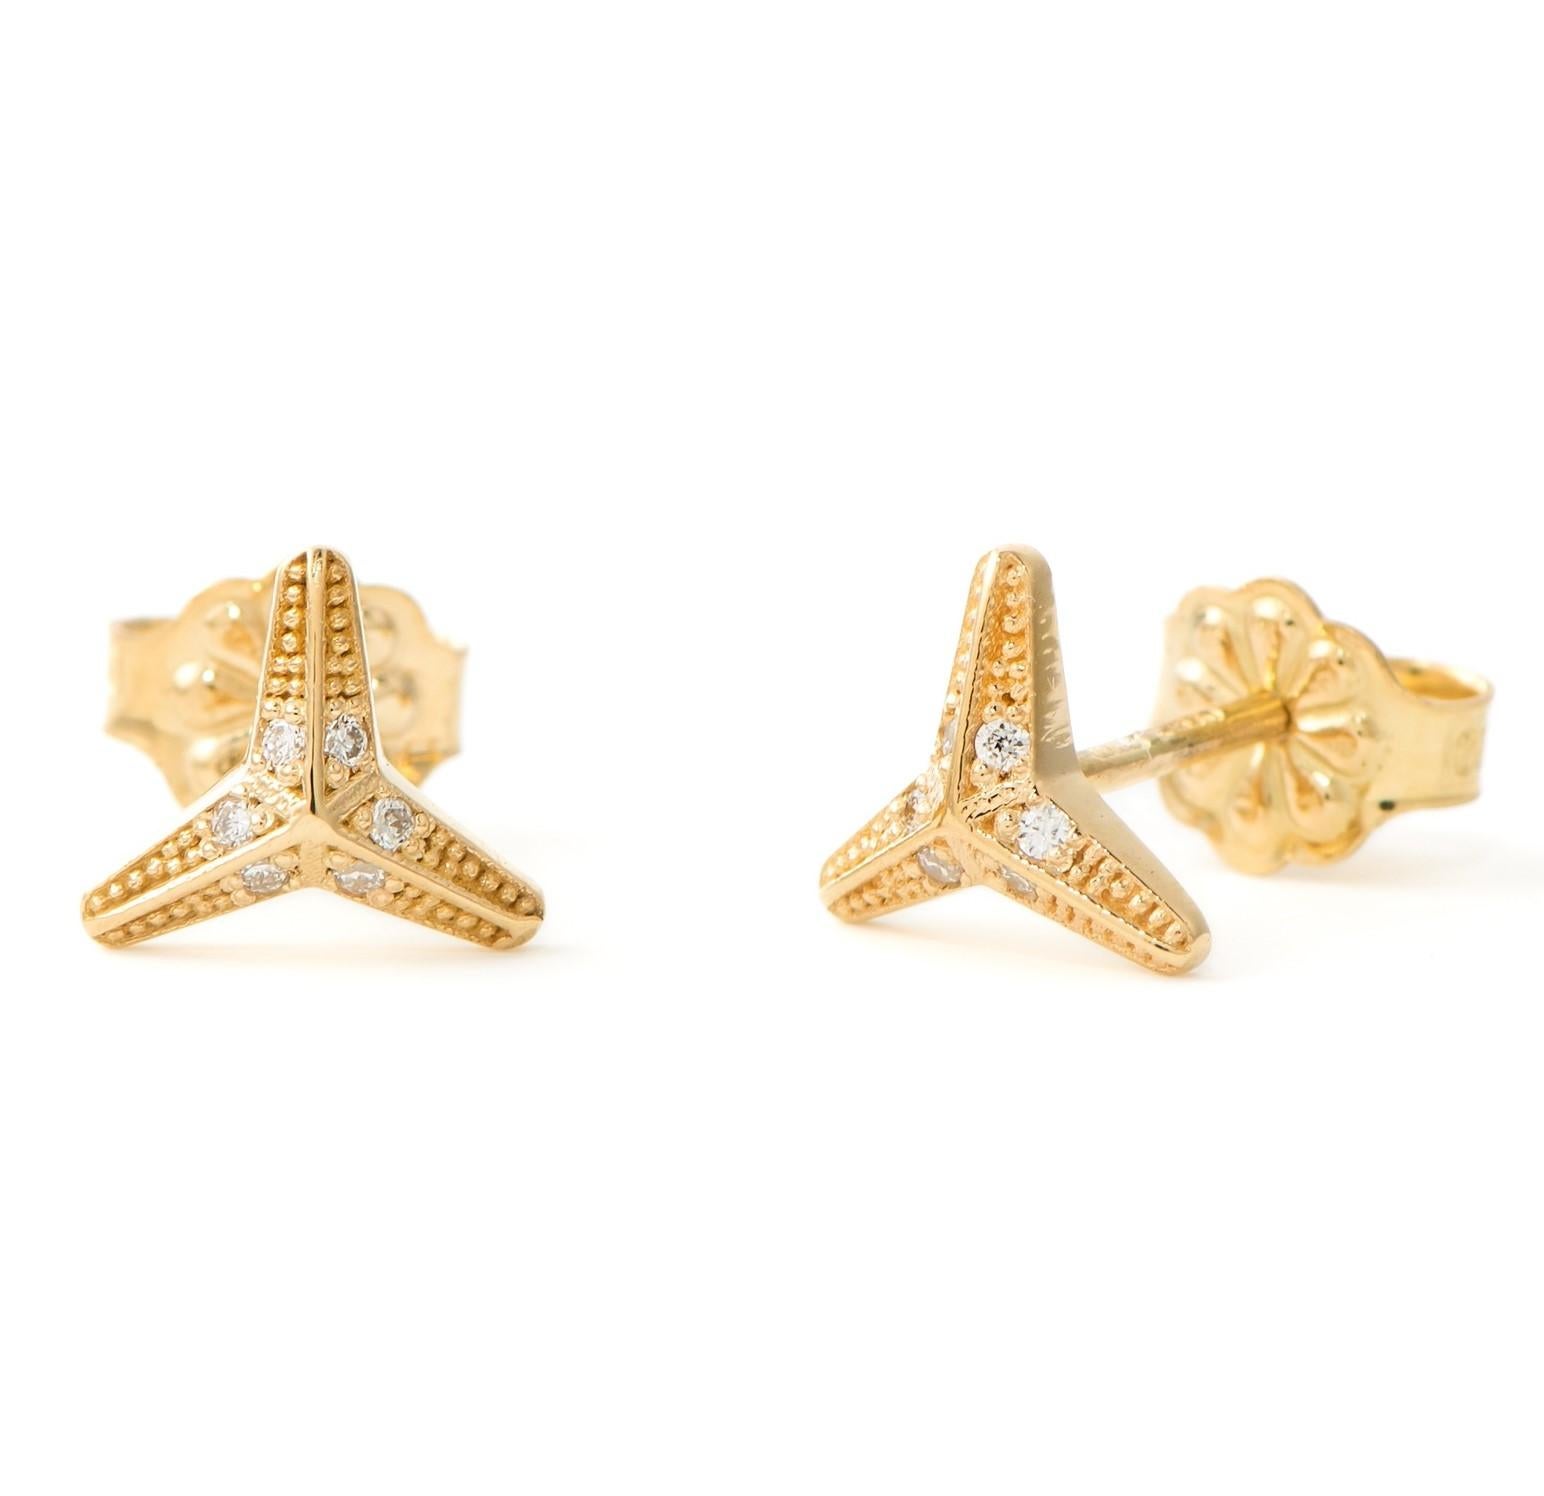 The Three pointed star, ear studs are crafted in 18K yellow gold hallmarked in Cyprus. These super cute sculptural diamond ear studs, come in a highly polished finish and feature natural white Diamonds totalling 0,04 Cts, making them a valuable